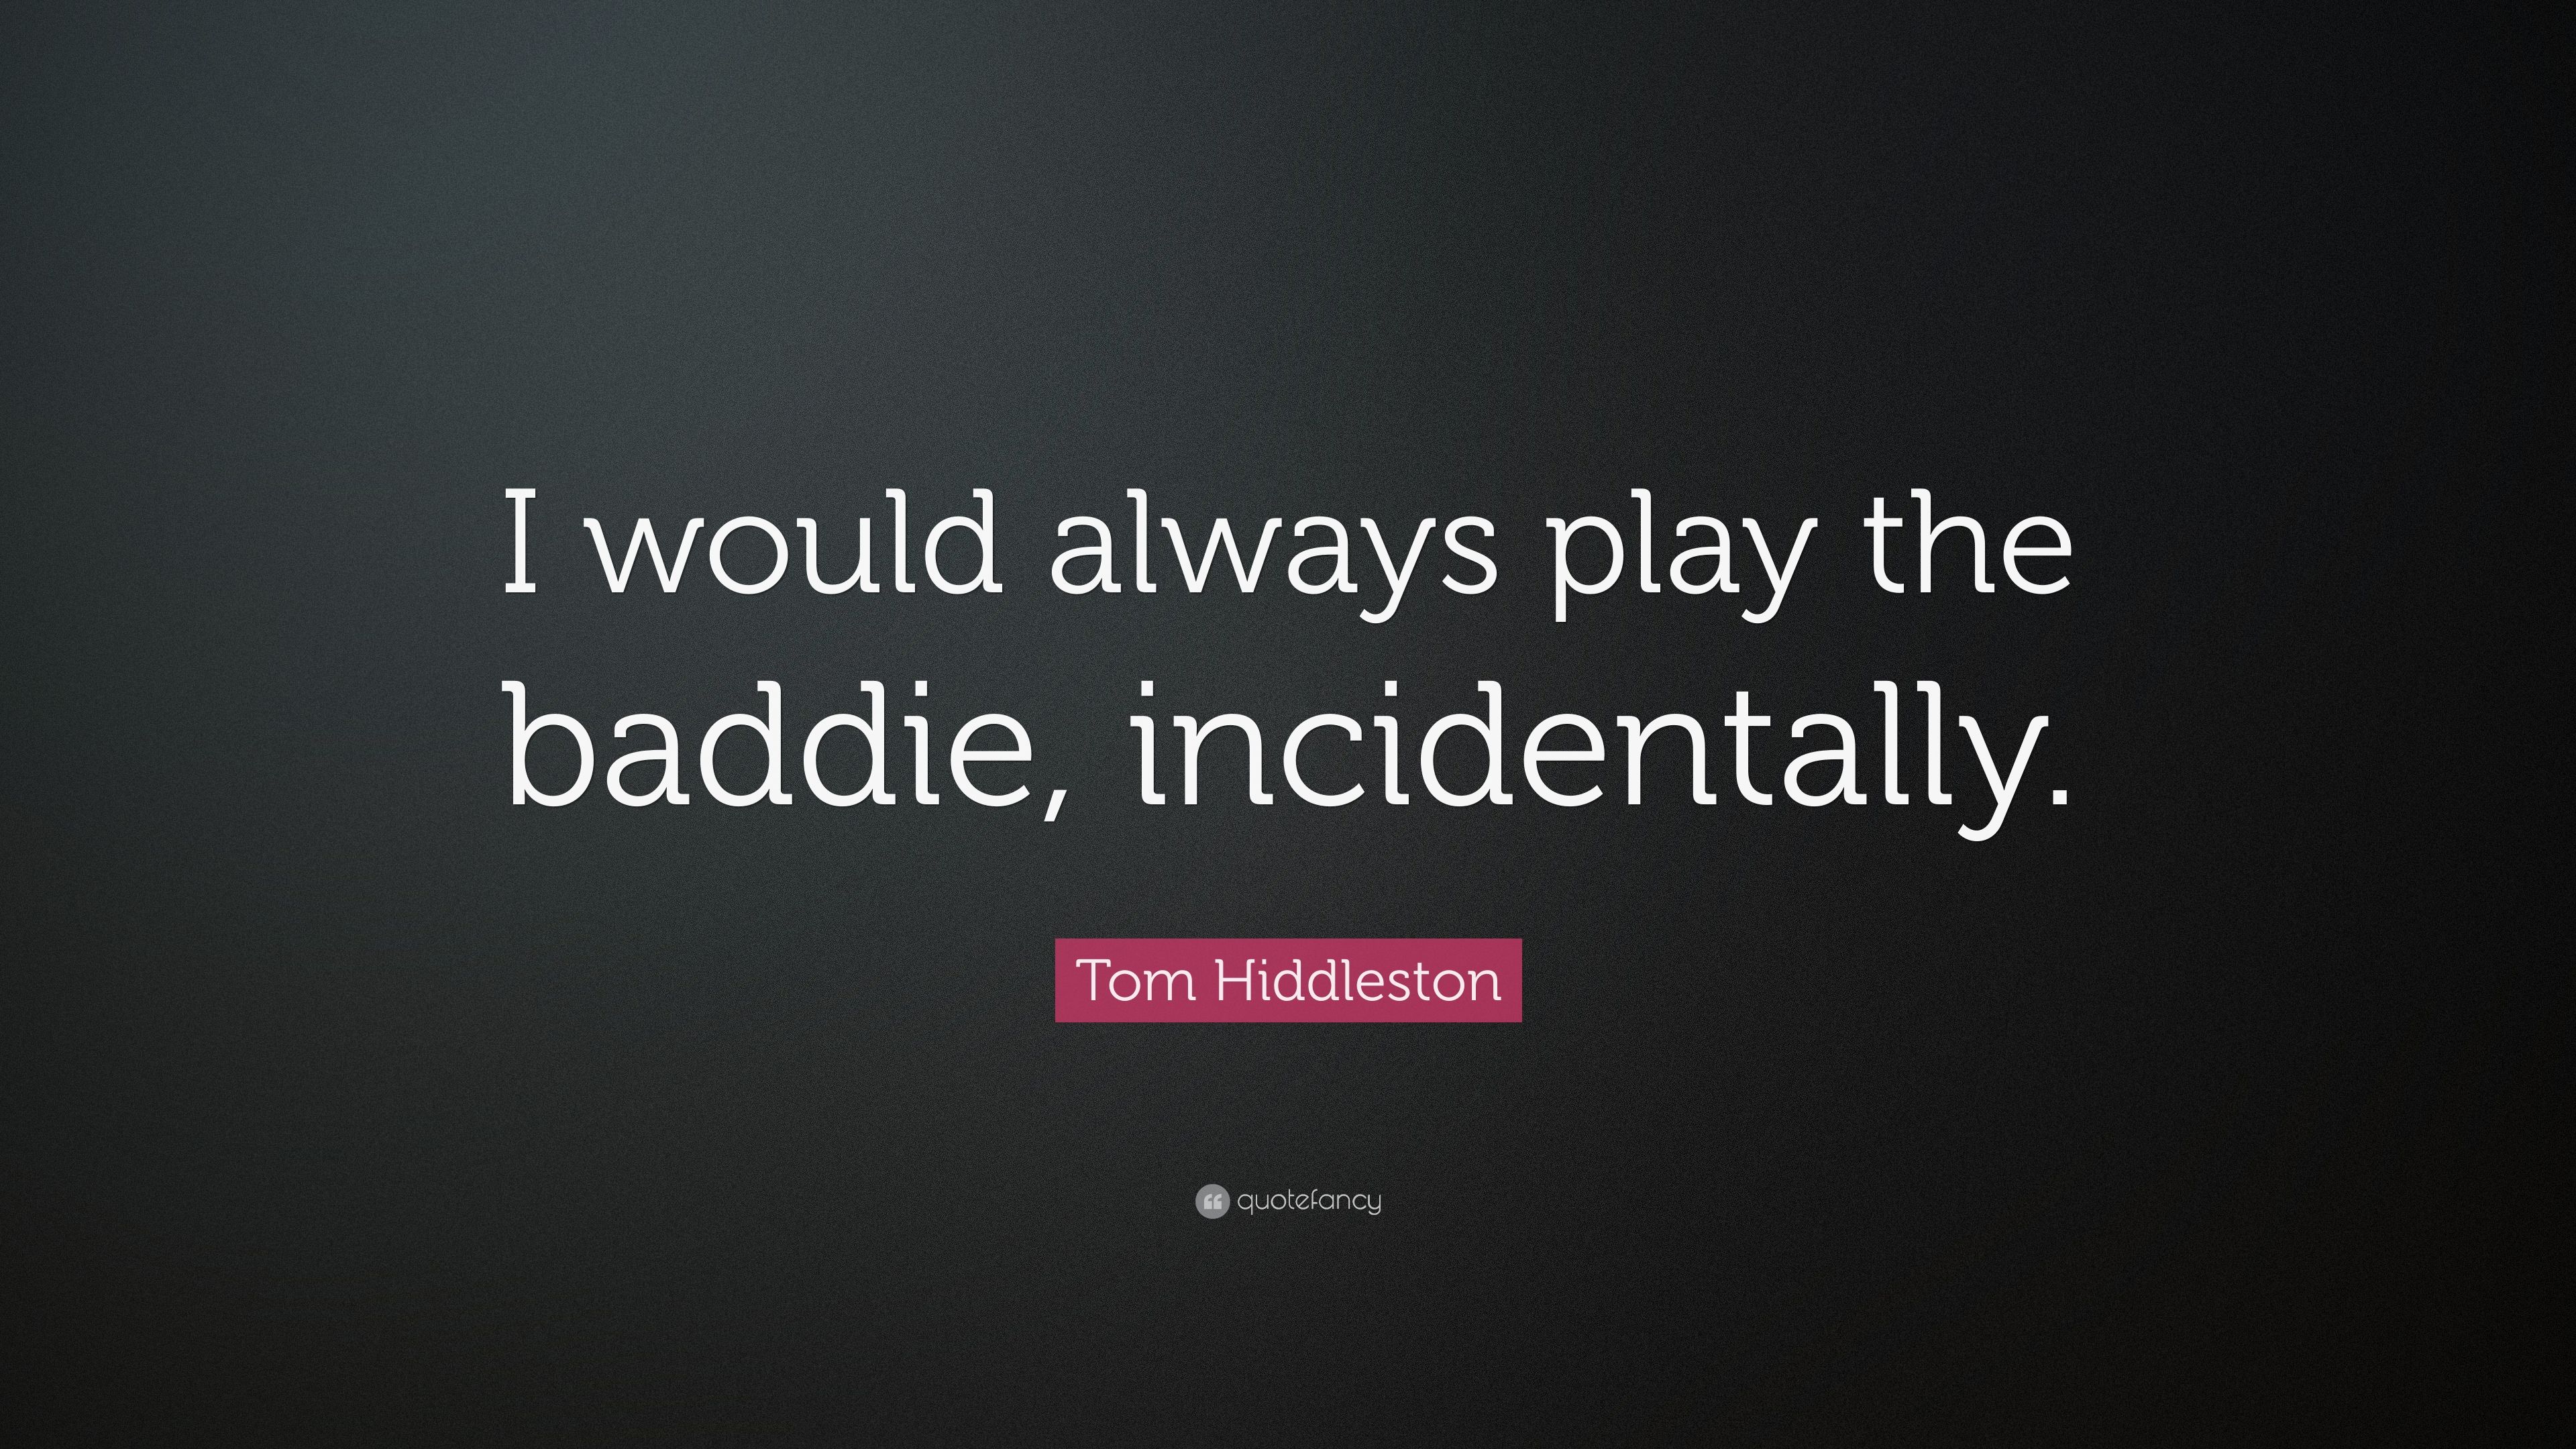 Tom Hiddleston Quote: “I would always play the baddie